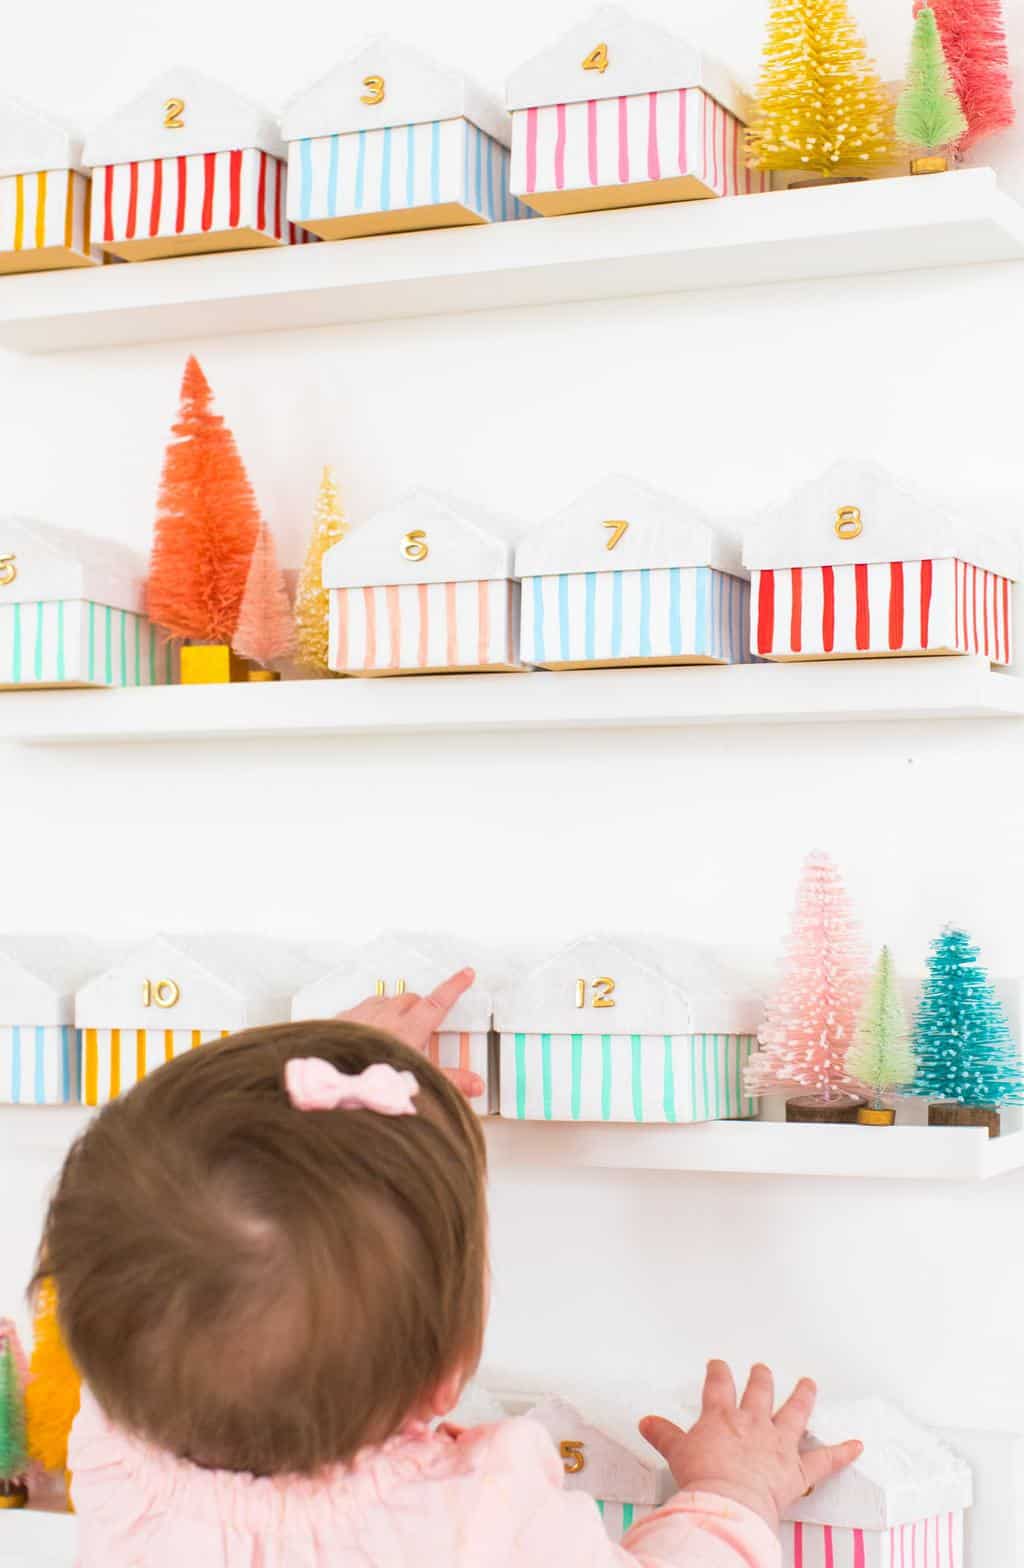 Gwen loves the colorful boxes advent calendar - Colorful Houses DIY Advent Calendar by top Houston lifesyle blogger Ashley Rose of Sugar and Cloth #diy #christmas #advent #holiday #decor #idea #howto #kids #crafts